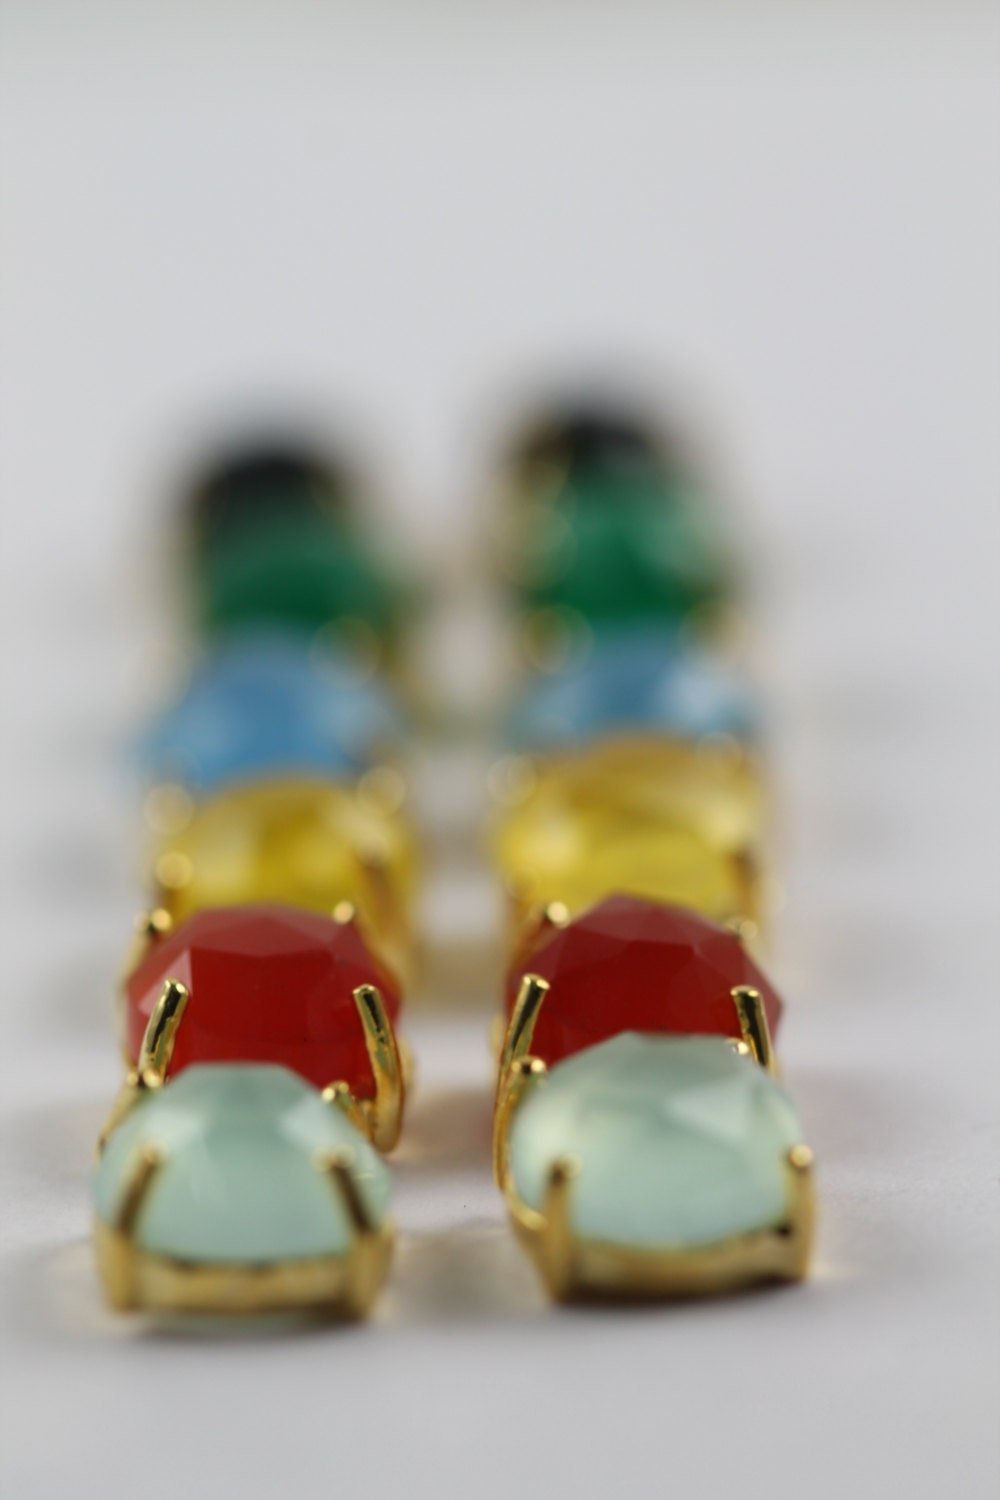 earring studs in natural chalcedony green faceted stones in prong settings - Meena Design